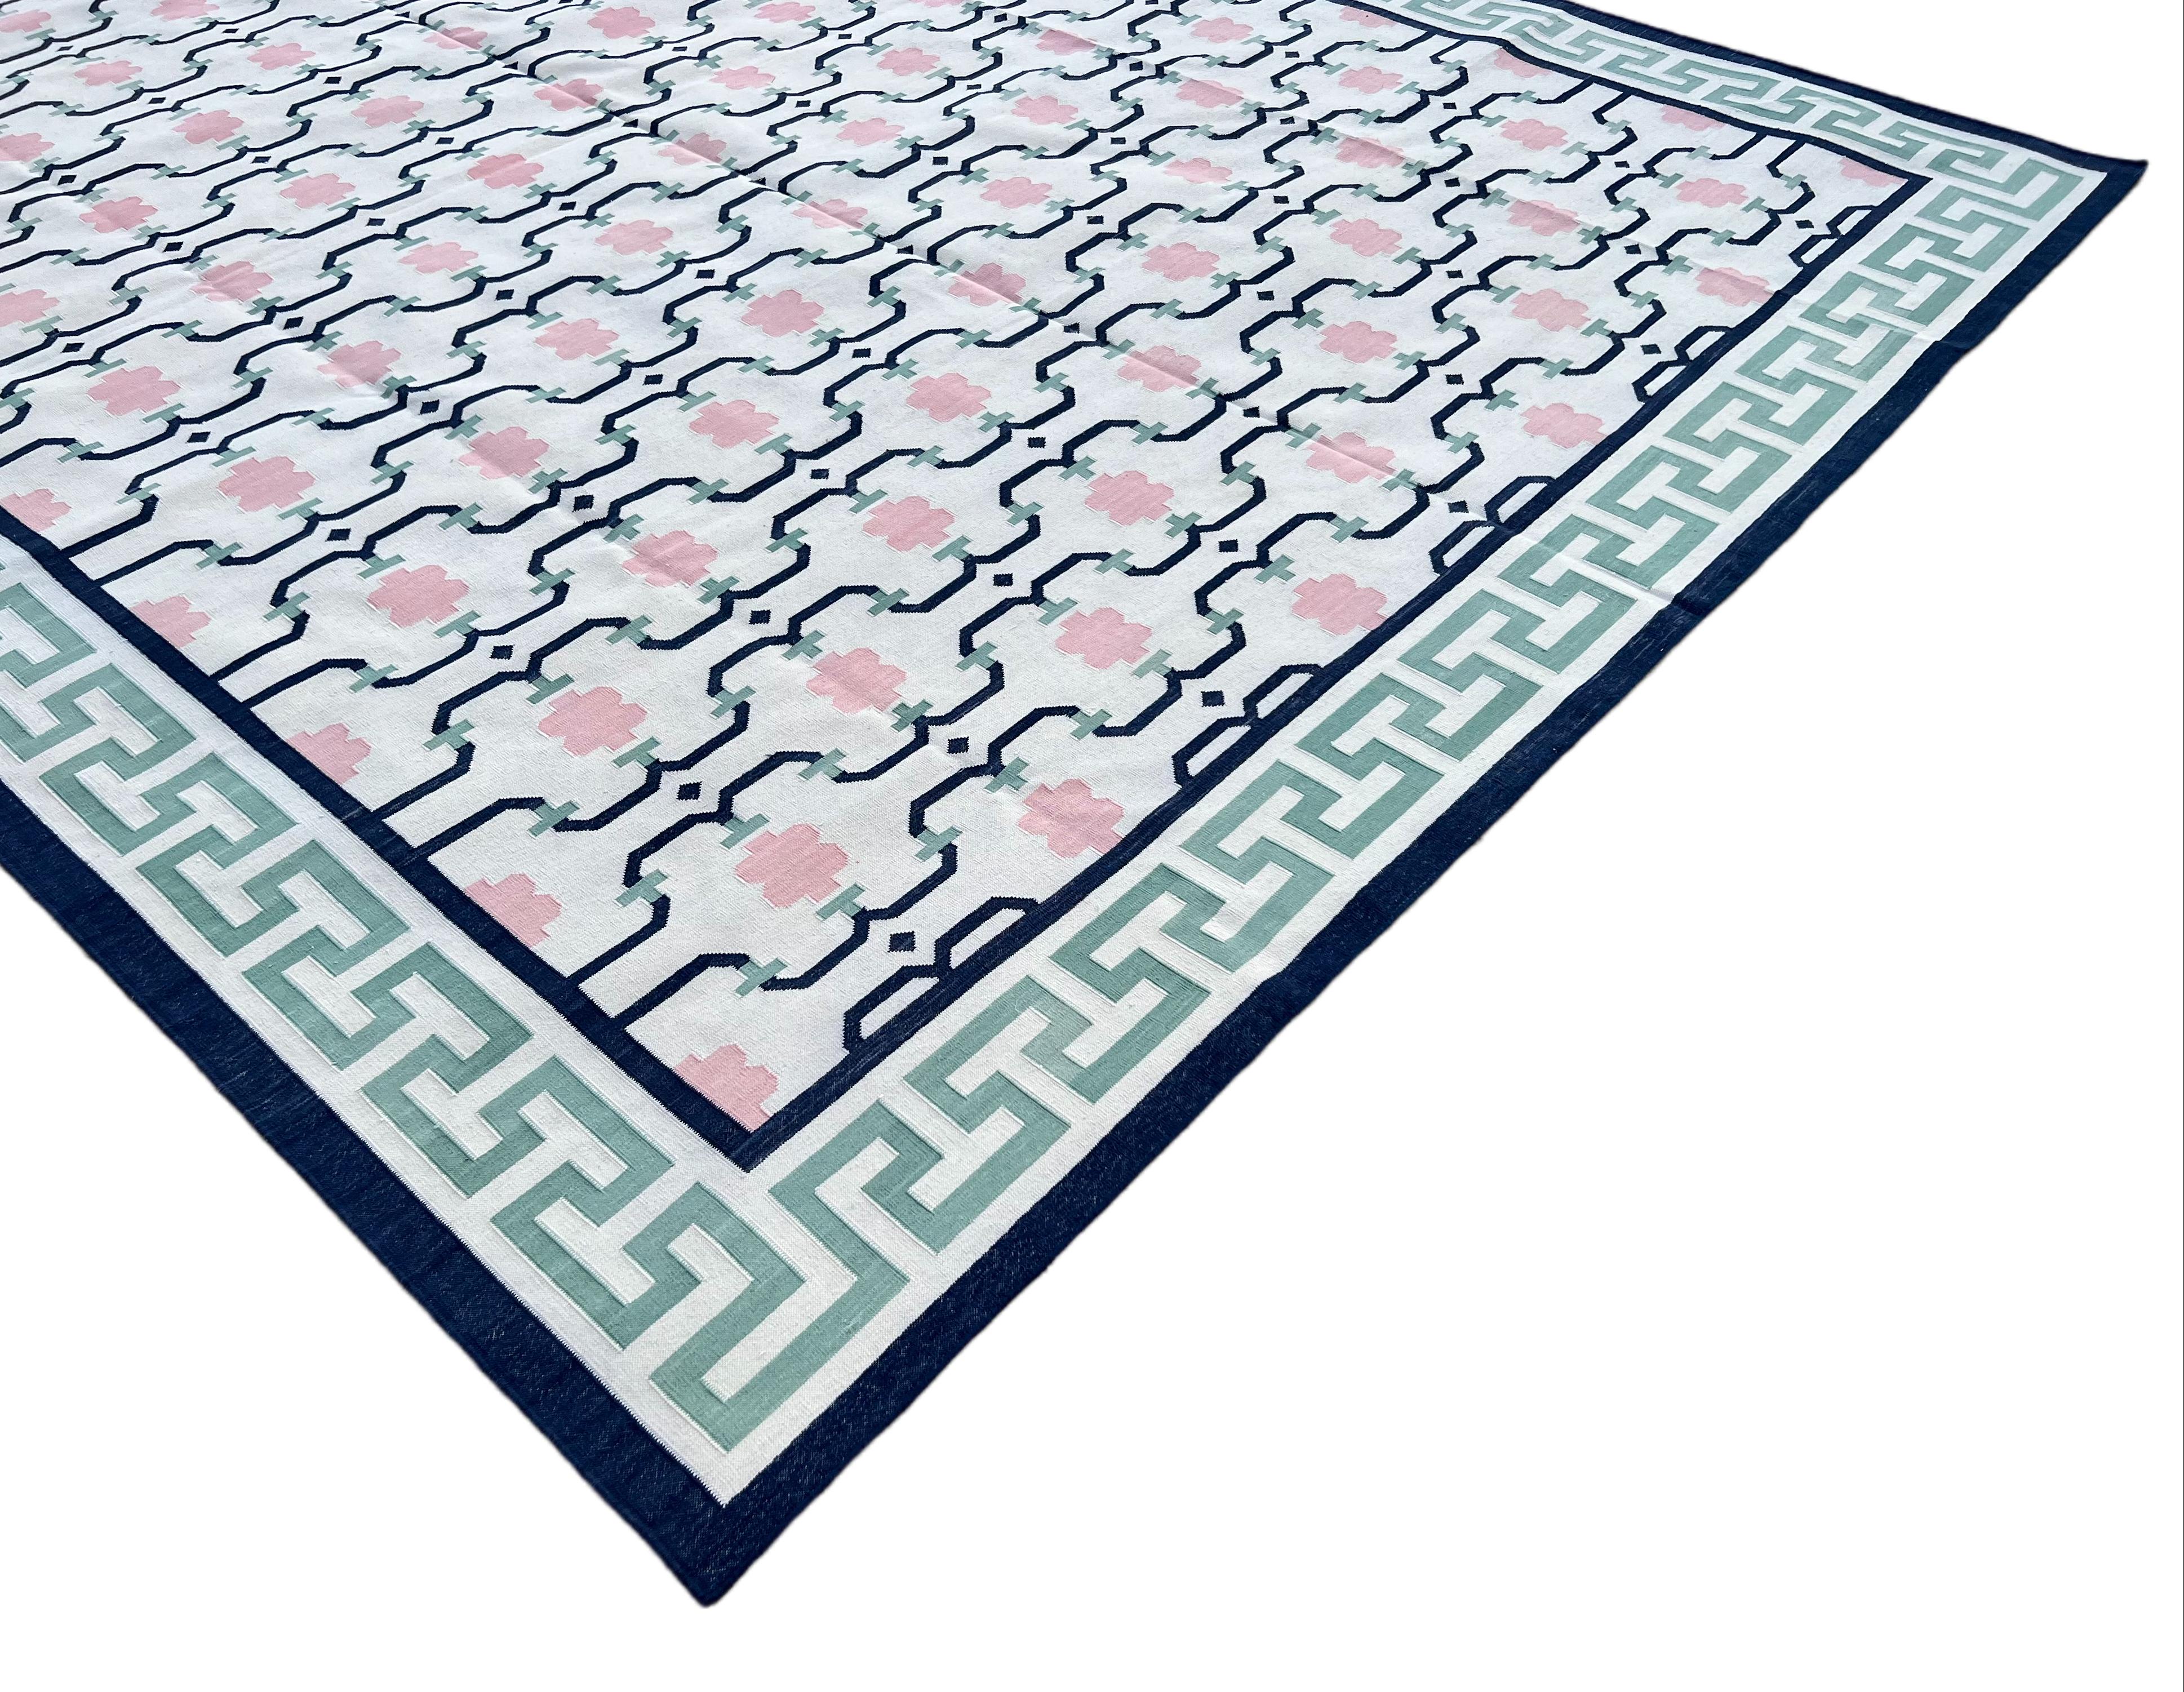 Handmade Cotton Area Flat Weave Rug, Cream, Green & Navy Blue Geometric Dhurrie In New Condition For Sale In Jaipur, IN